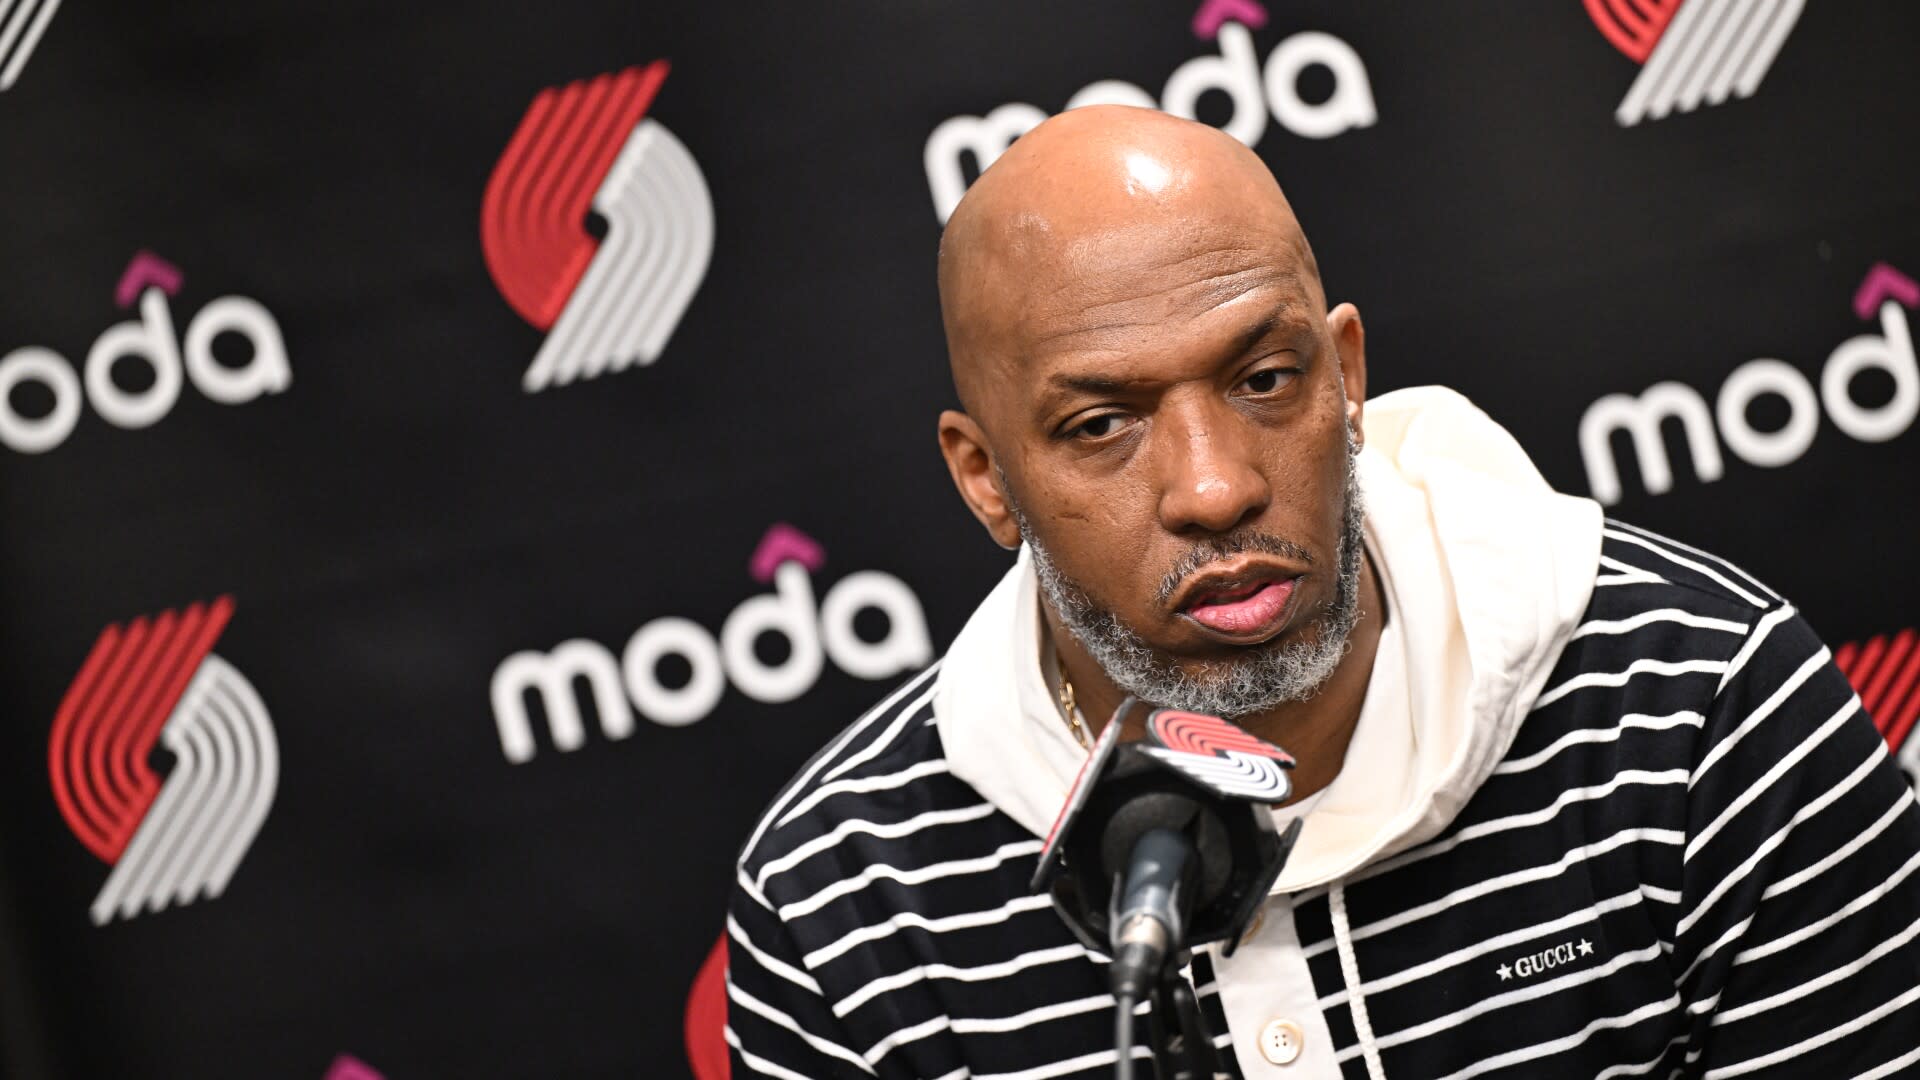 If Trail Blazers move on from Chauncey Billups as coach, other teams lined up